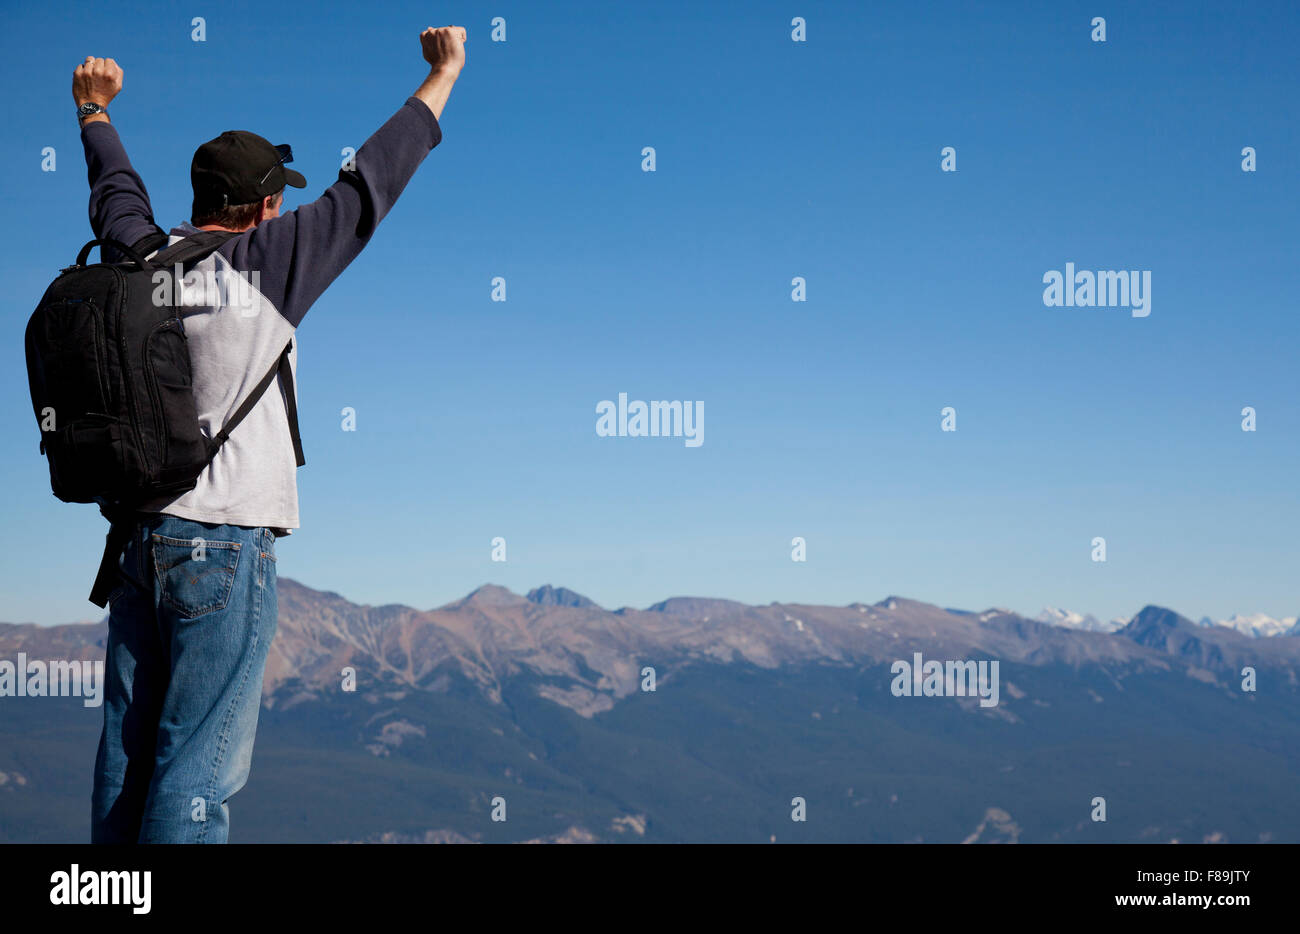 happy and victorious hiker celebrating on mountain summit Stock Photo